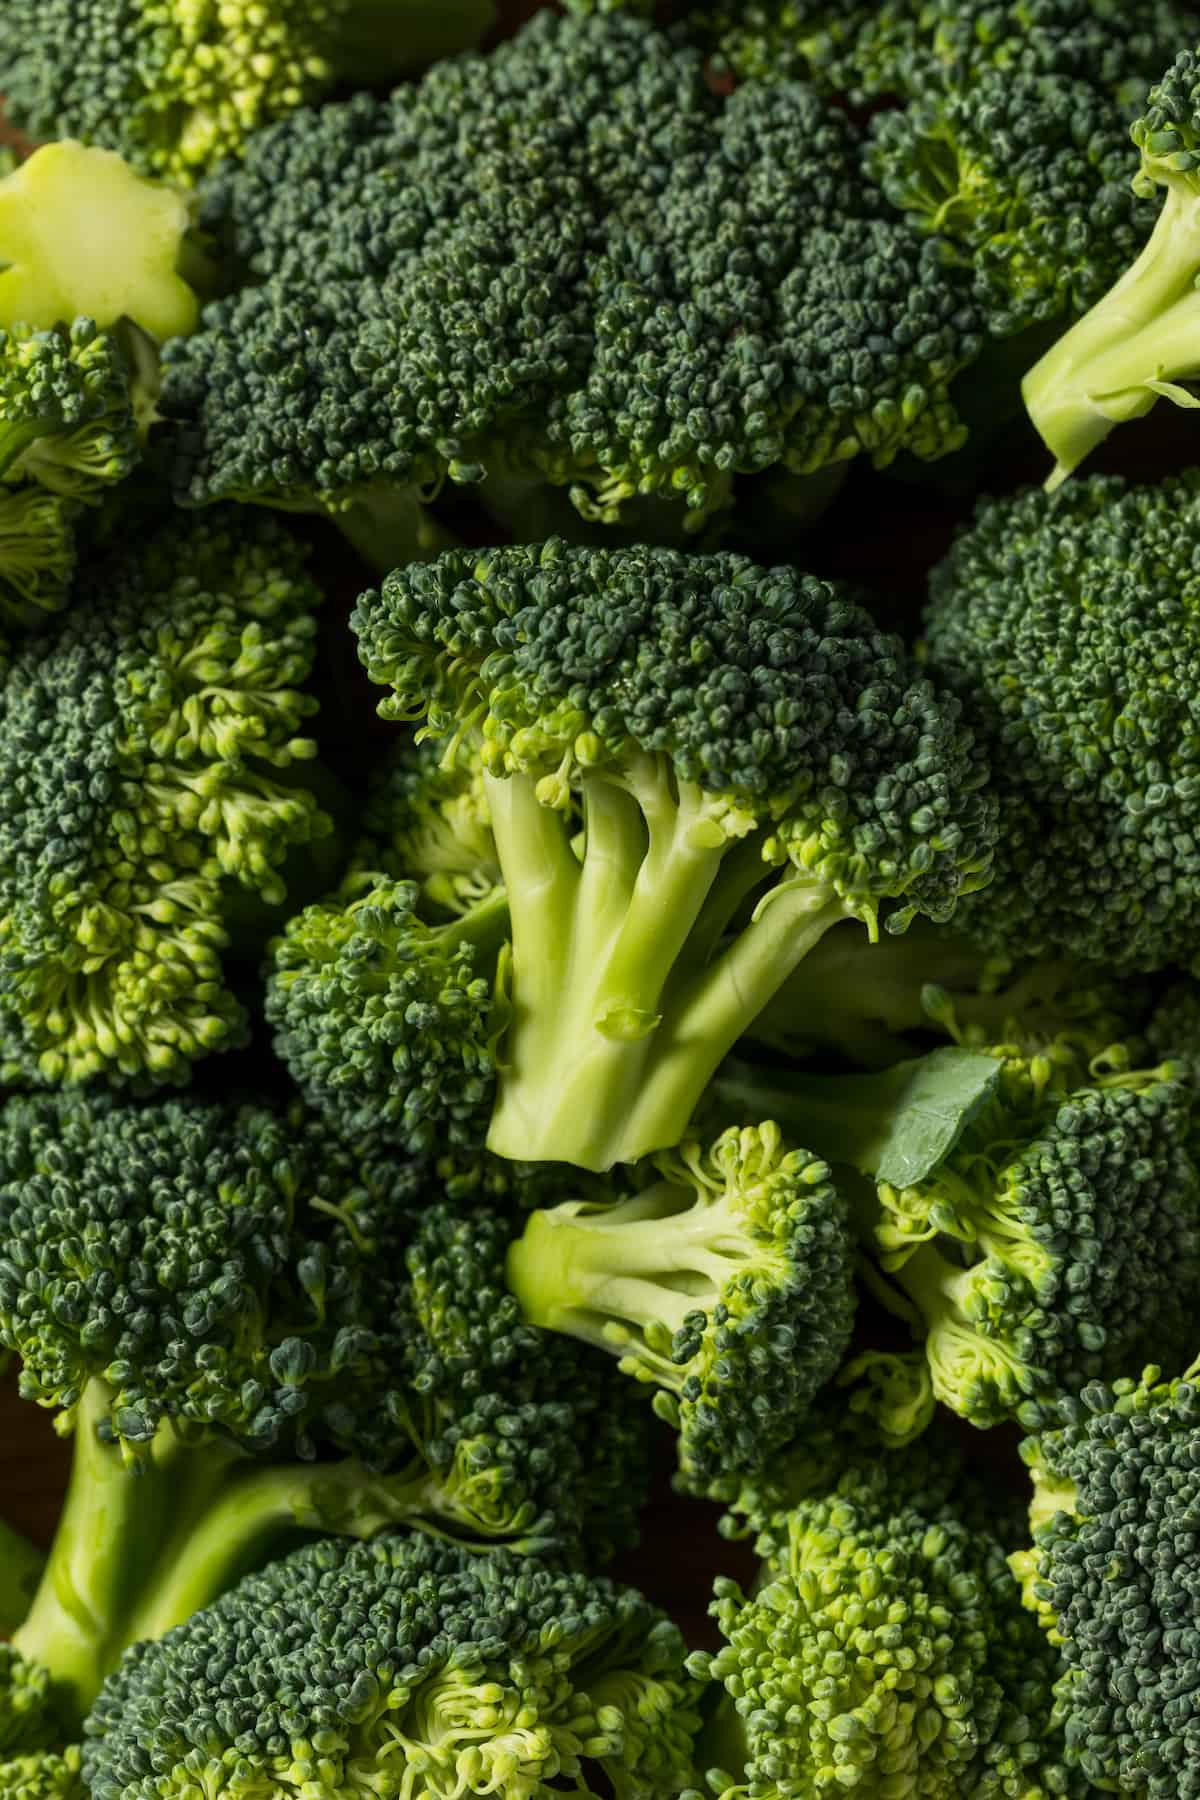 Close up of raw broccoli florets ready to cook